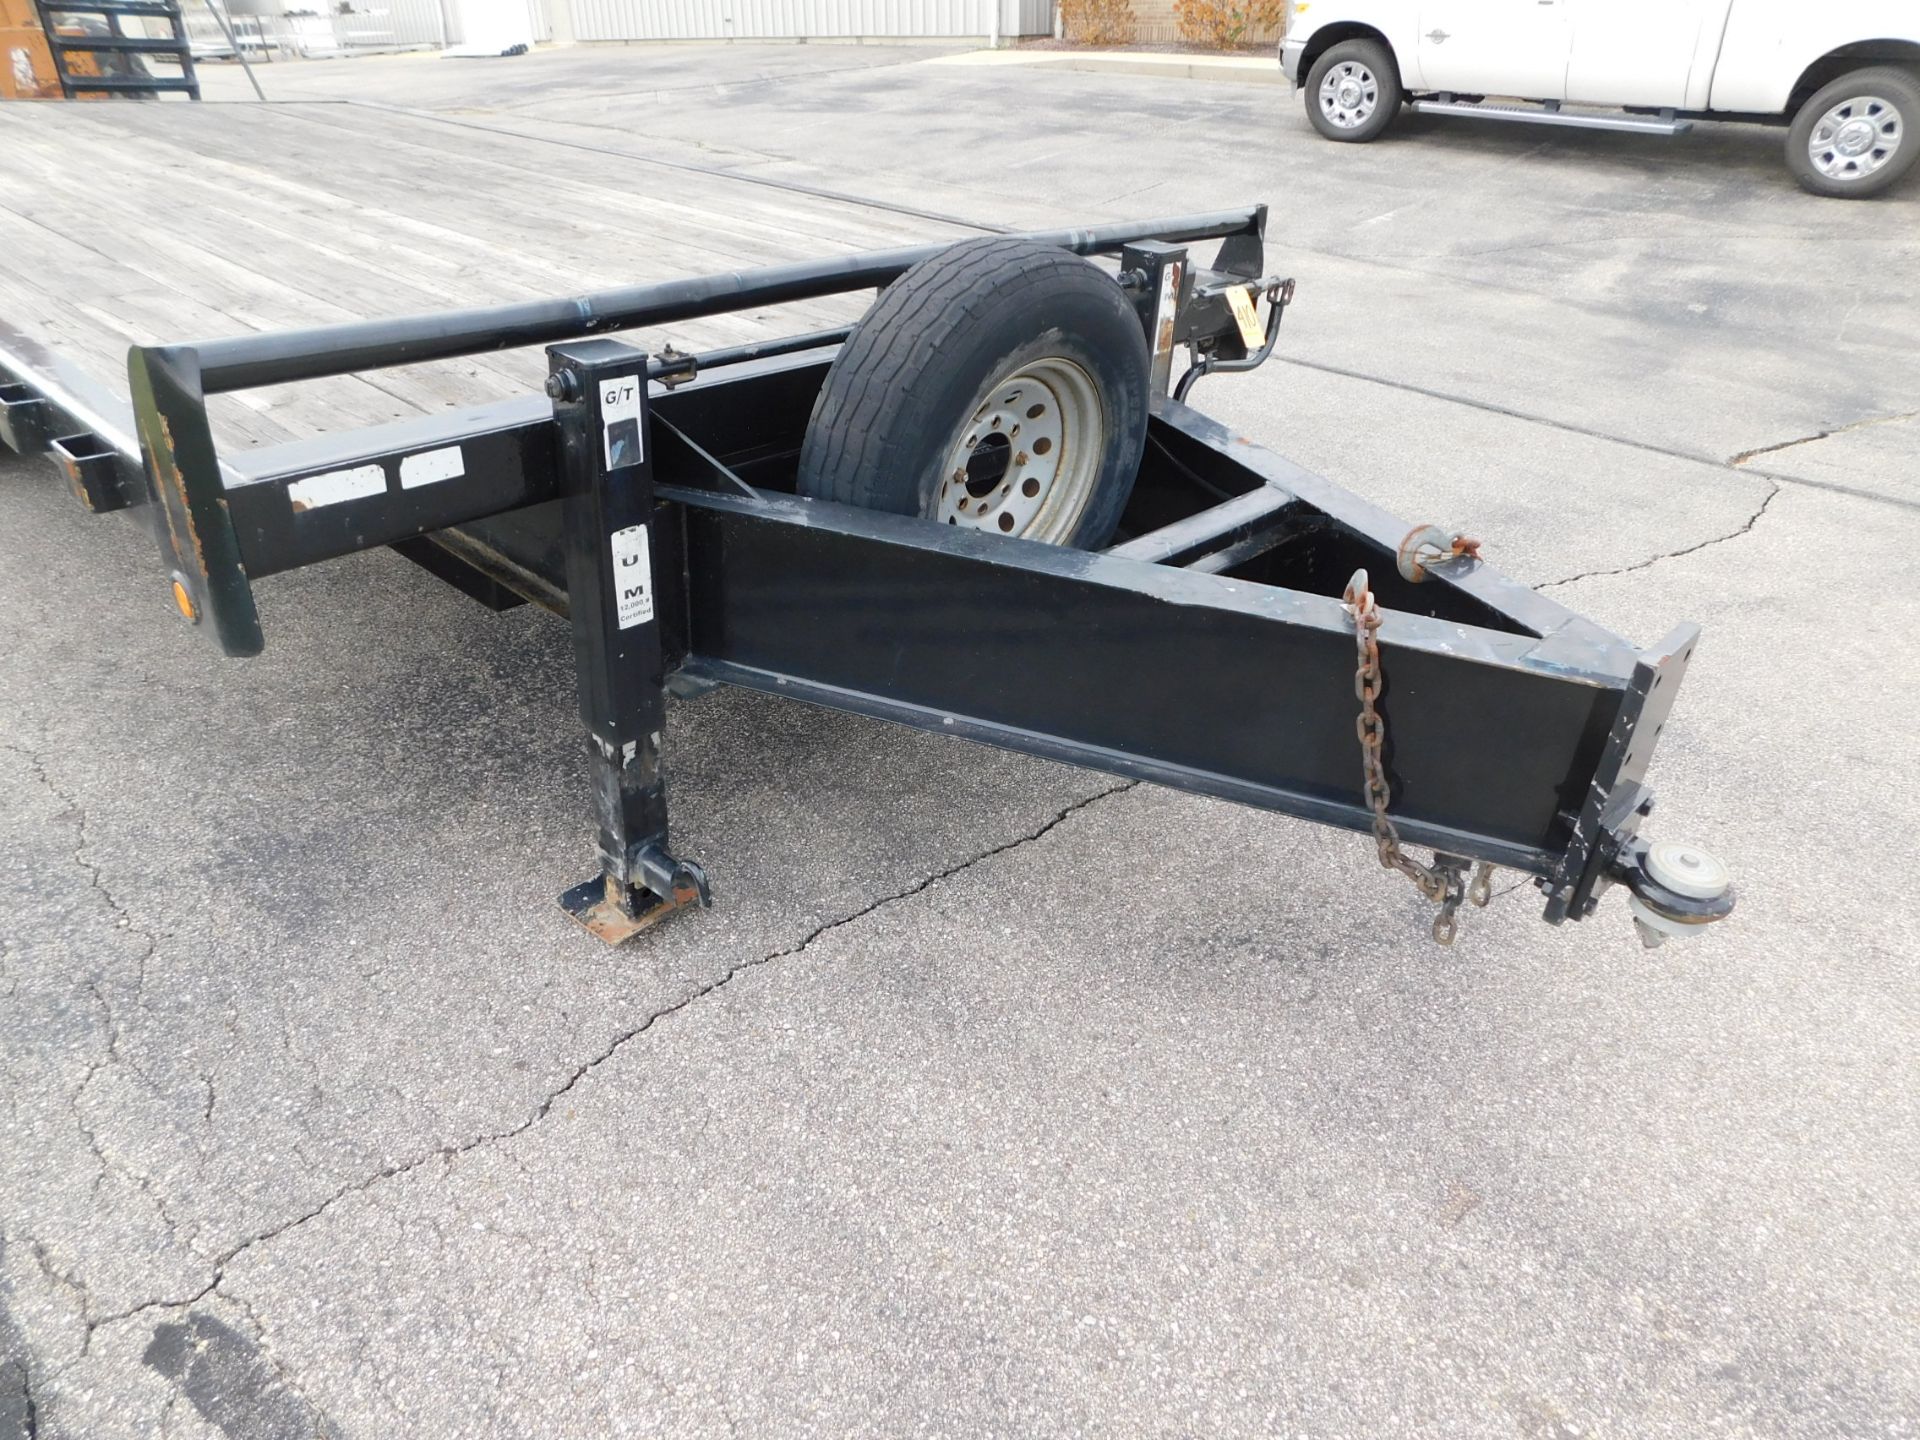 2009 Gatormade 21' Tandem Axle Equipment Trailer, 14,000 GVWR, 16' Deck with 5' Dovetail, 5' Trailer - Image 10 of 12